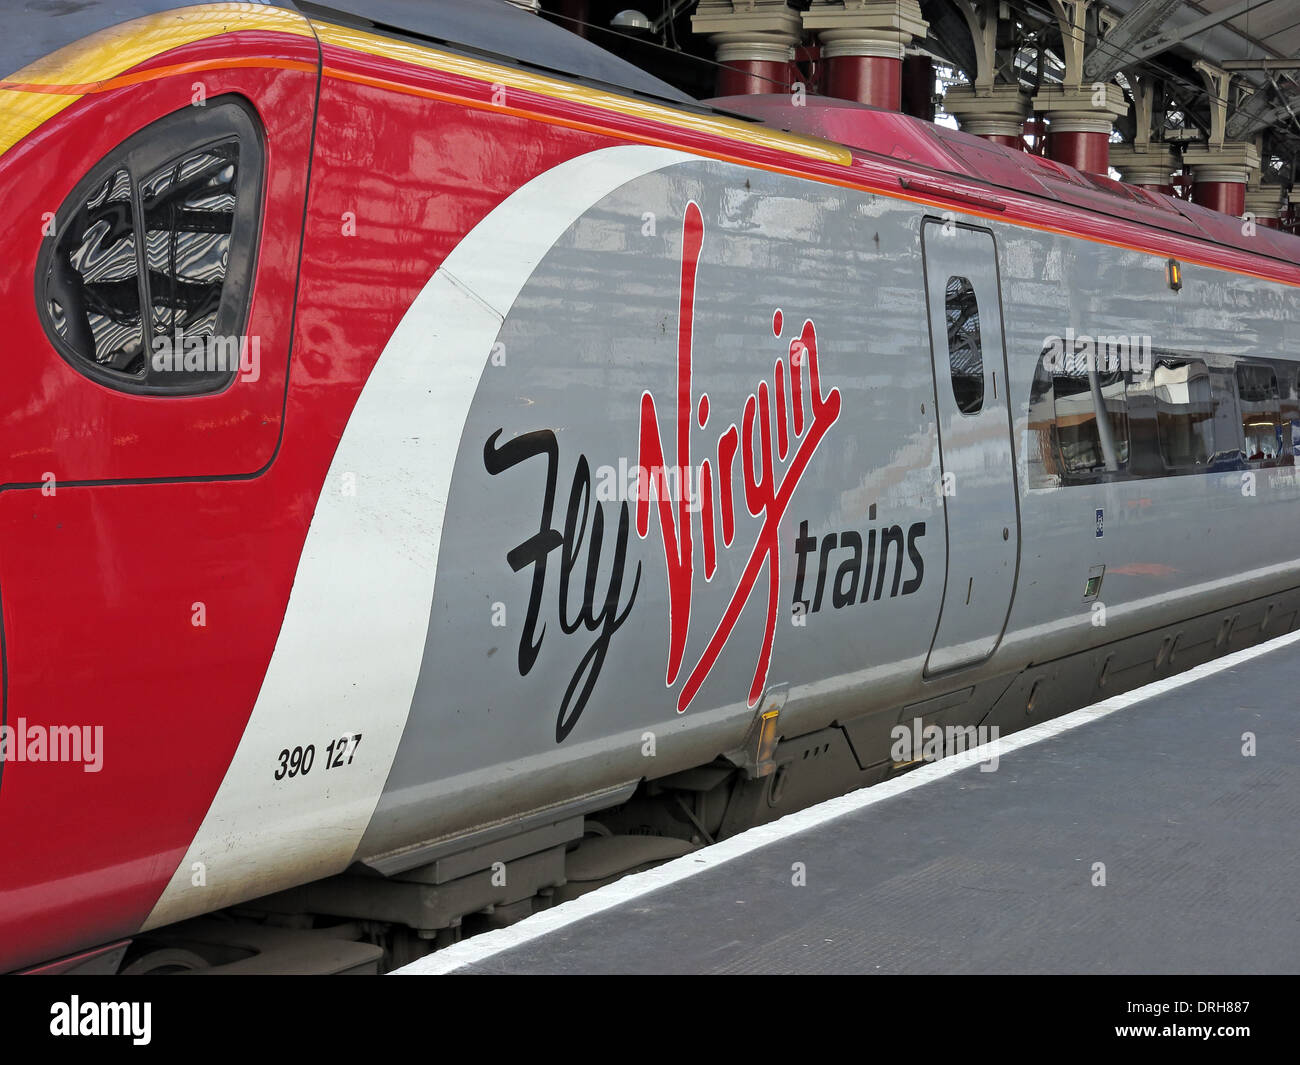 Fly Virgin Trains UK - Liverpool Lime St to Euston - red white & gray livery Stock Photo